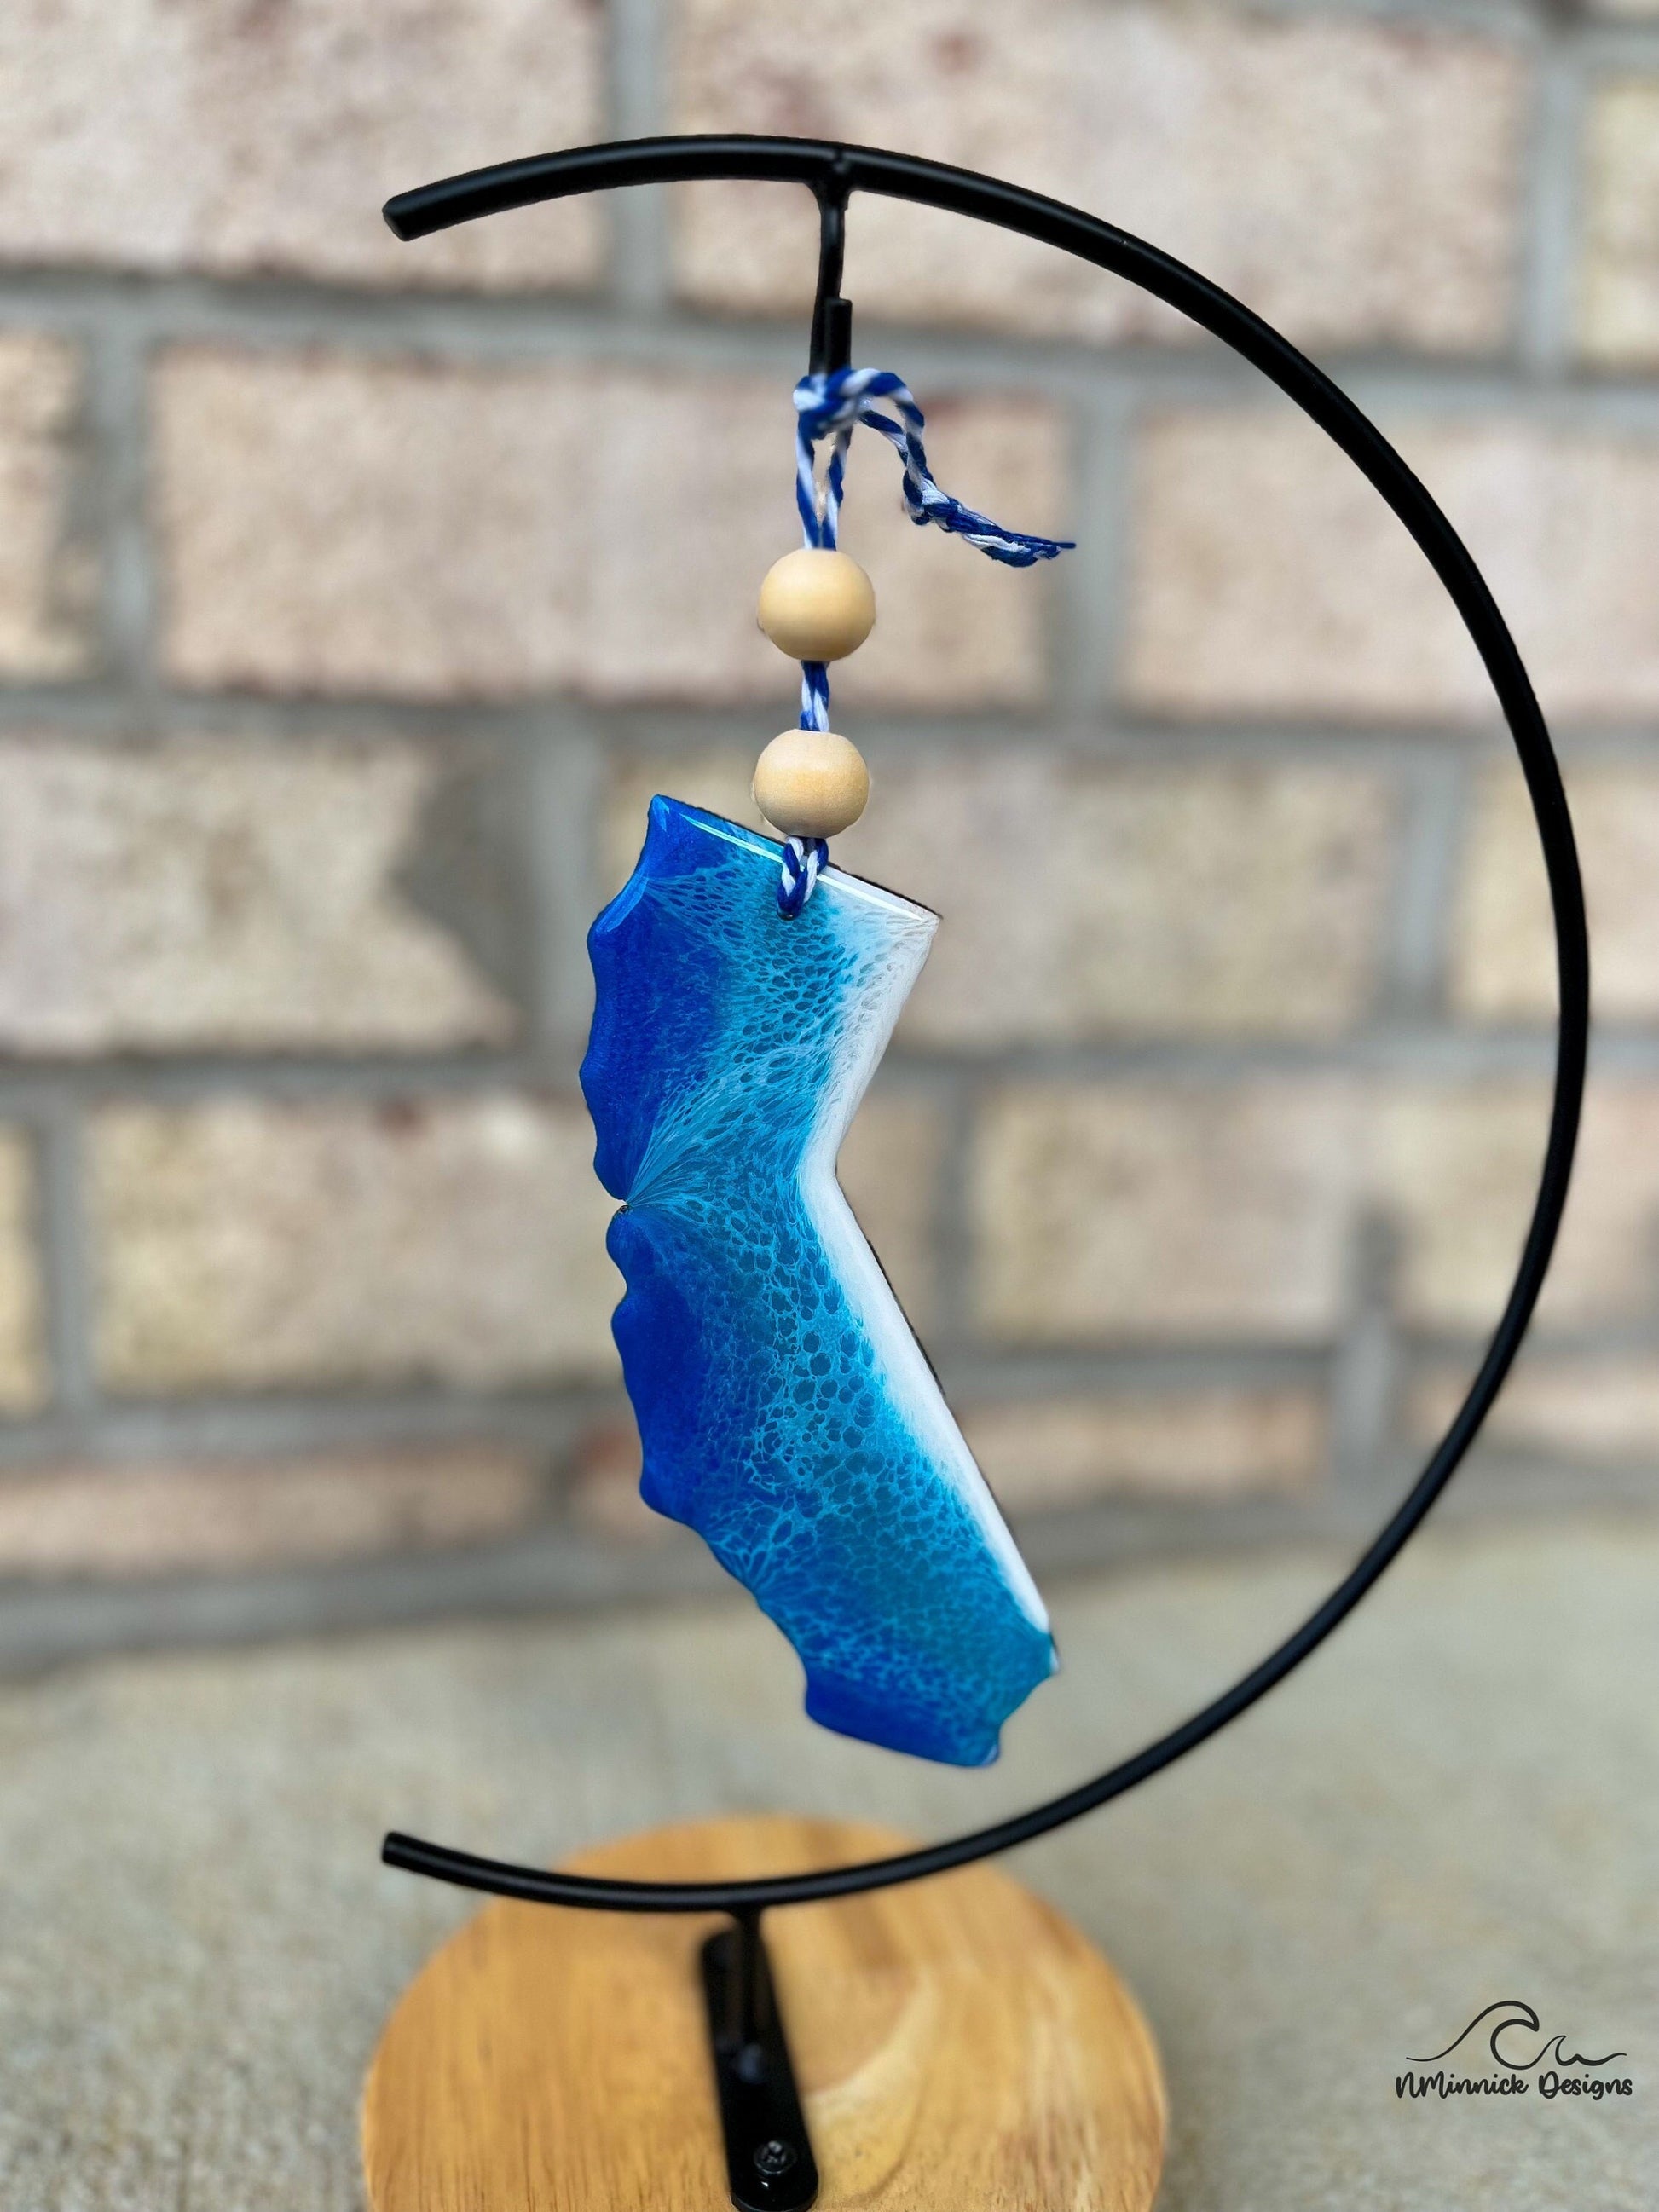 California coastal ornament with ocean wave art hanging from an ornament stand.